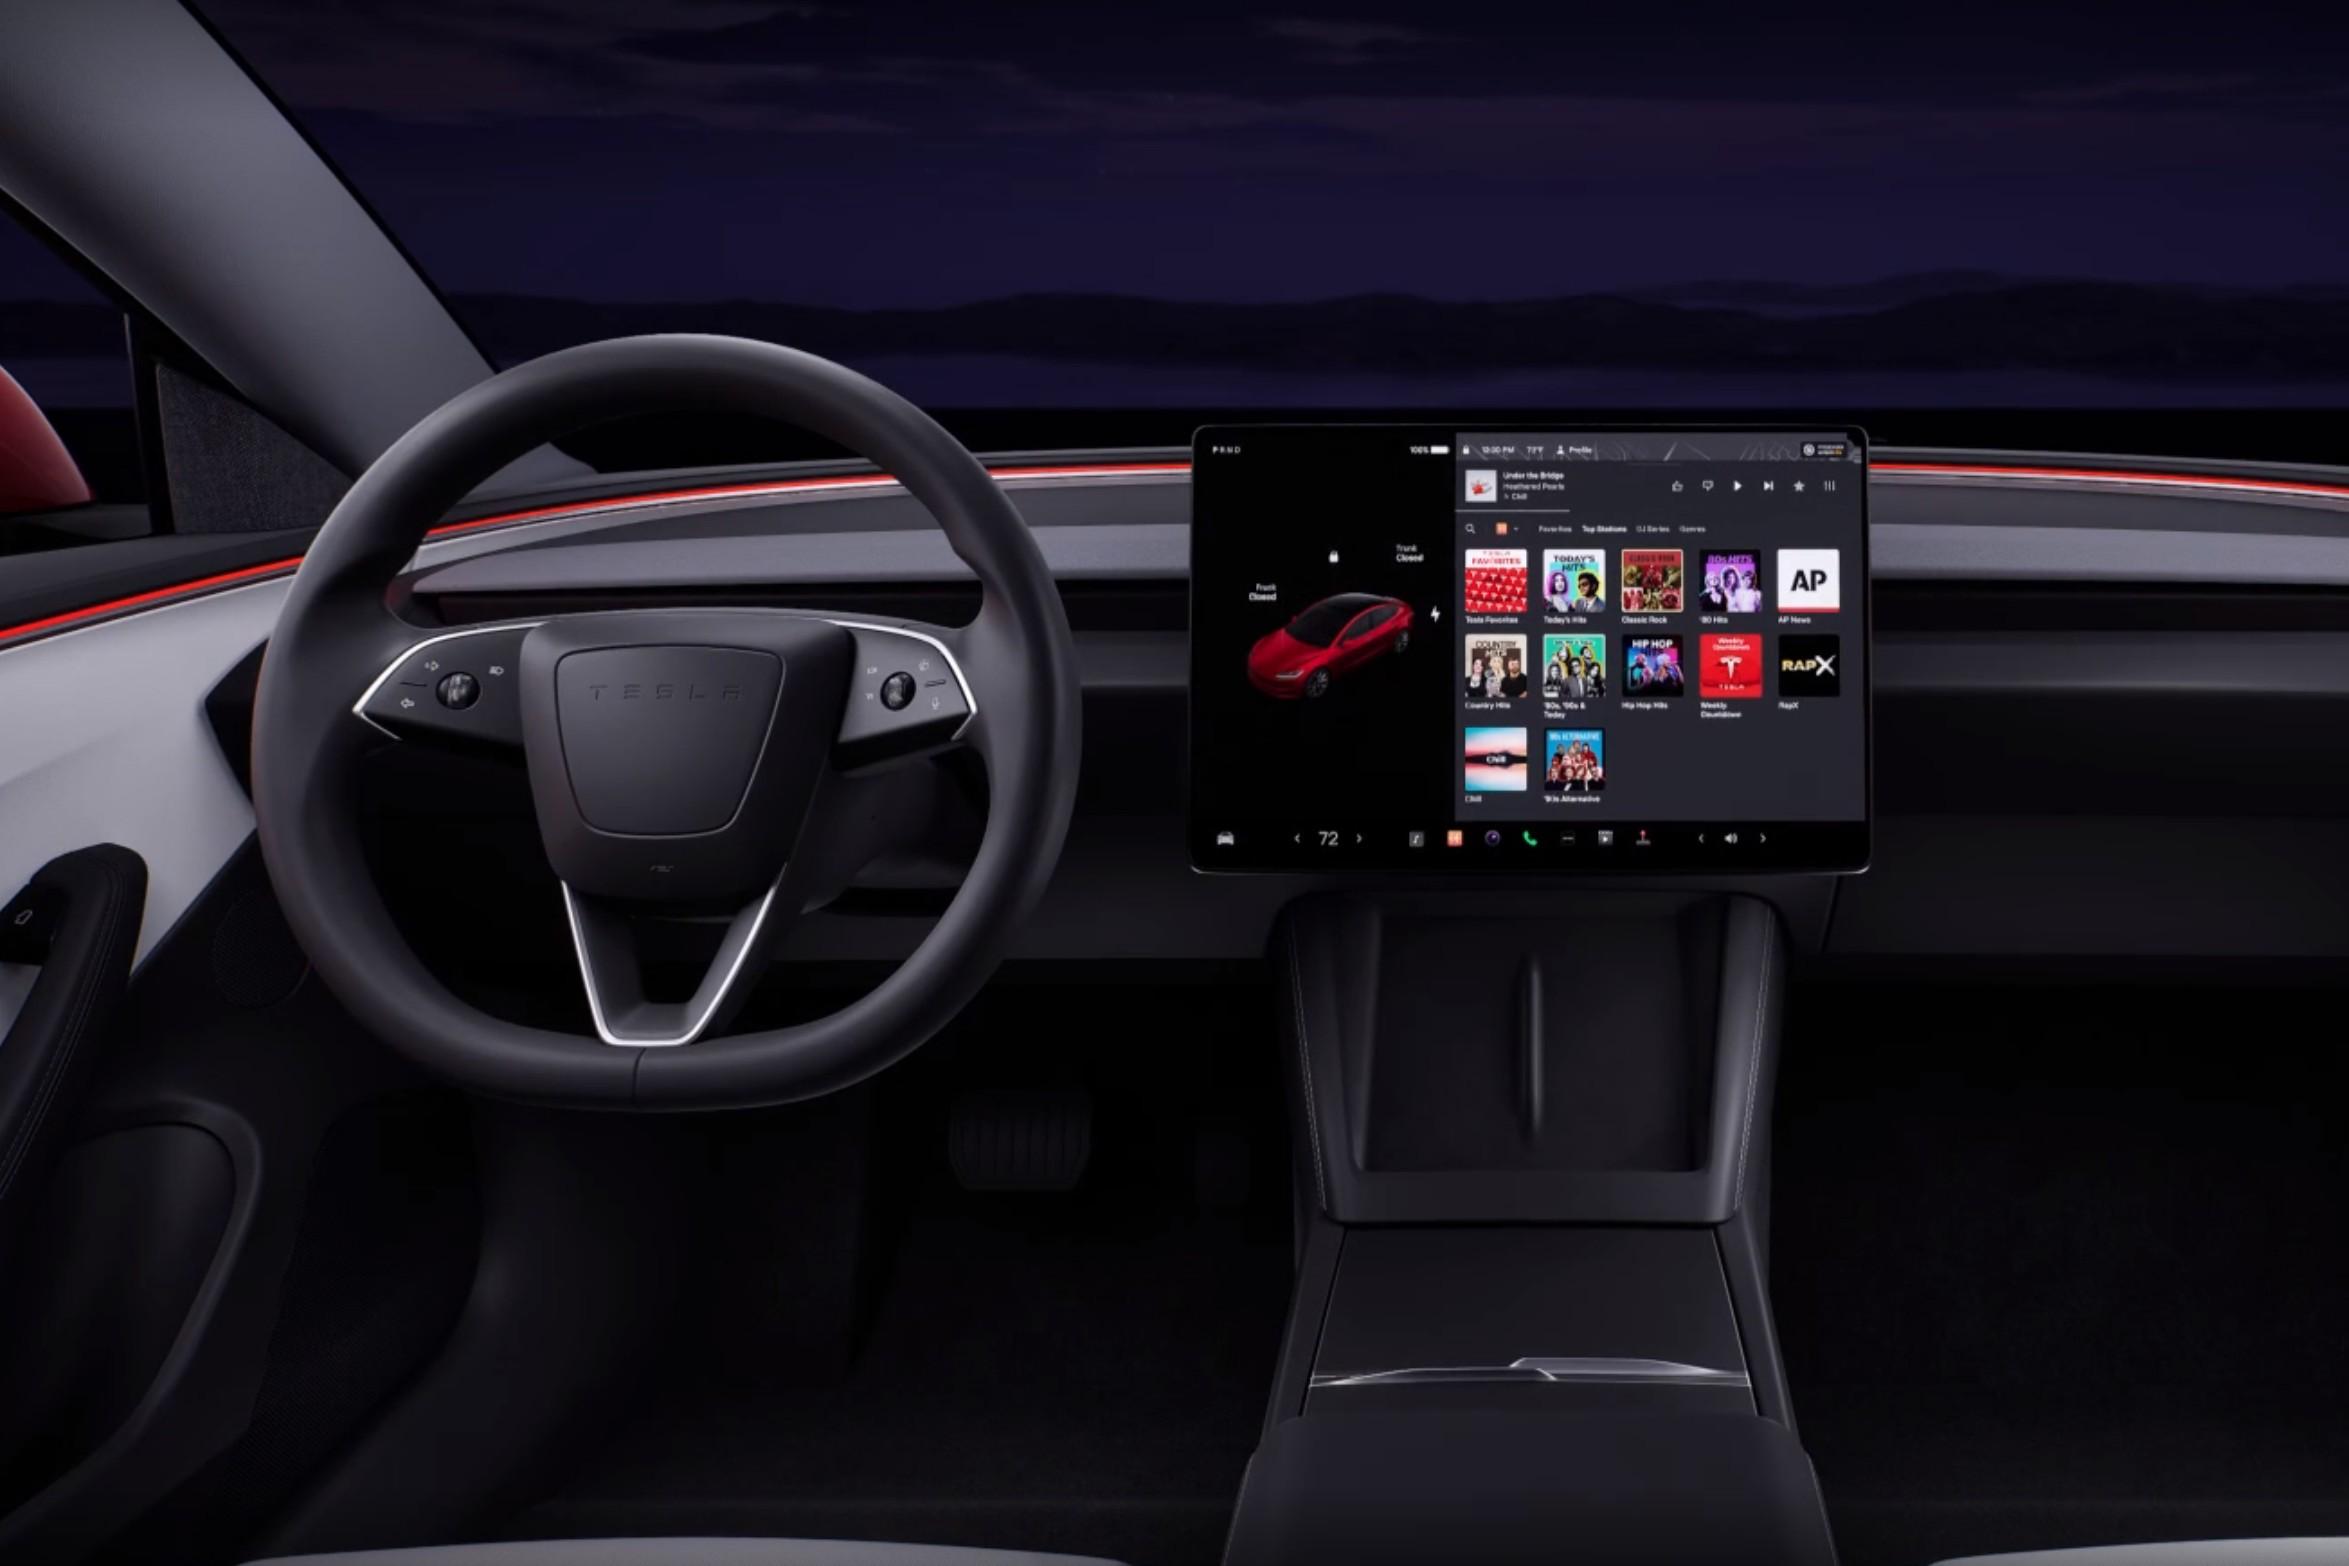 The refreshed Tesla Model 3 features wiper controls on the steering wheel.